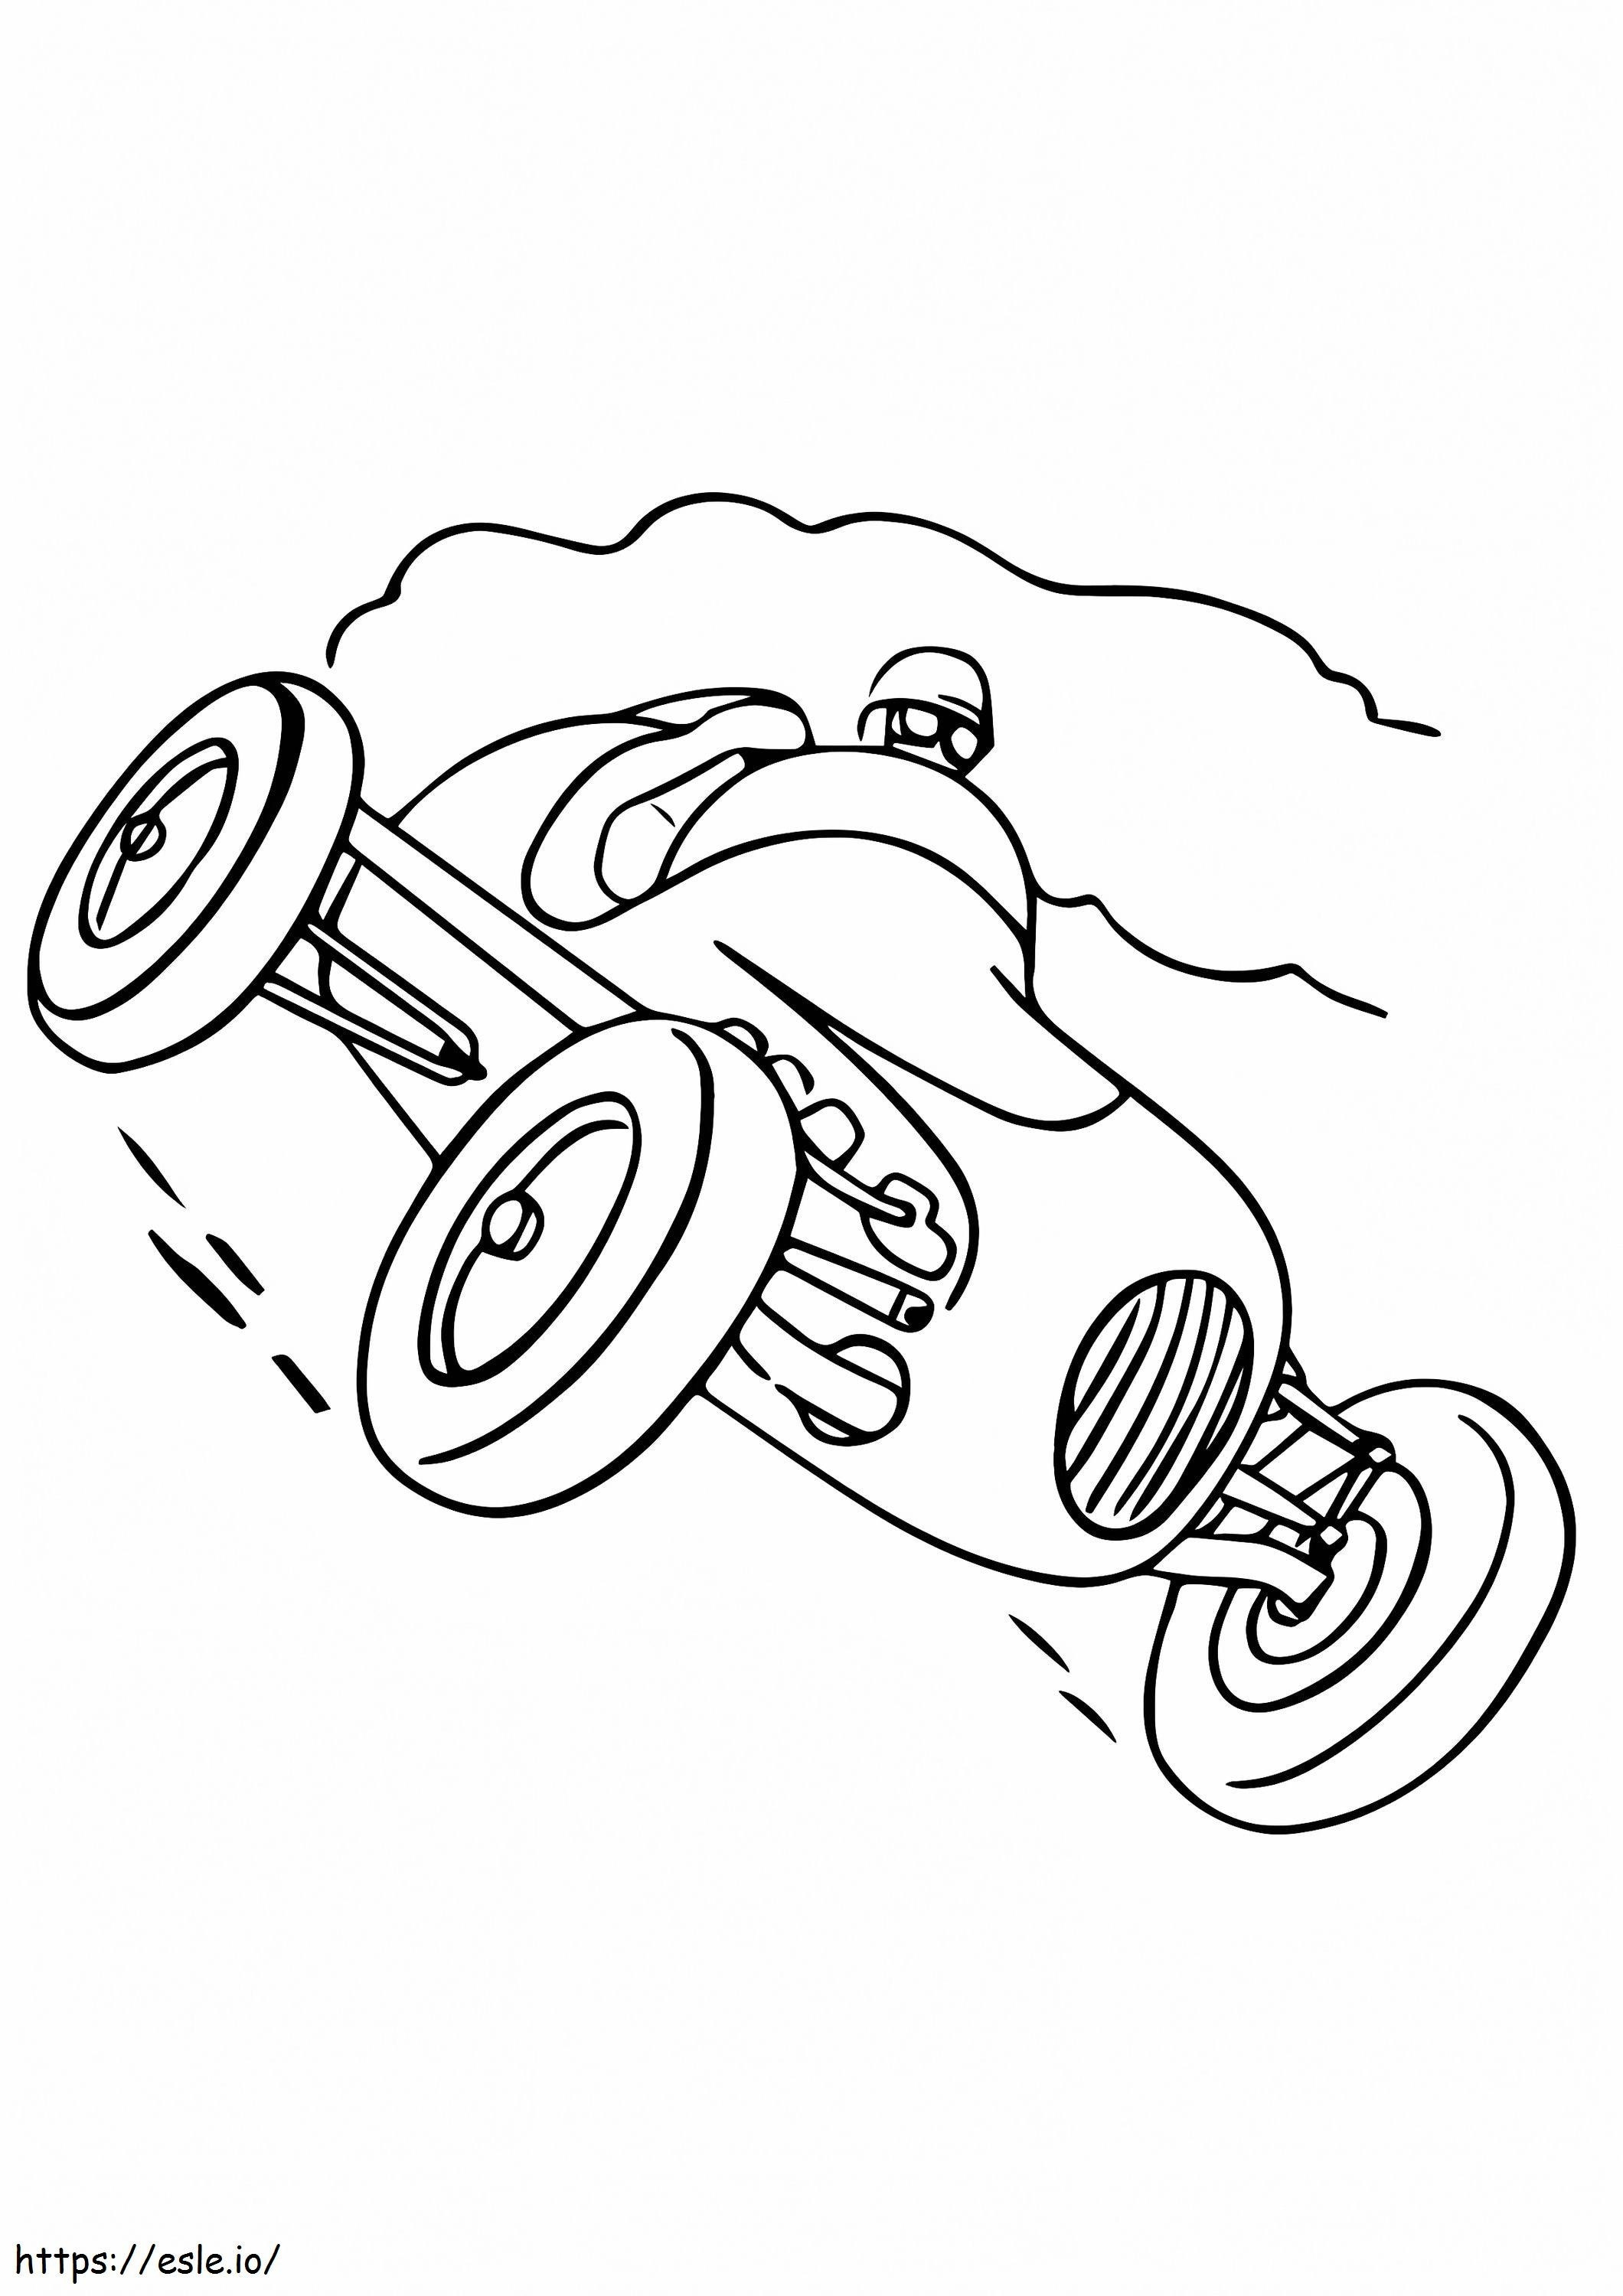 1526201472A Racing Car A4 coloring page